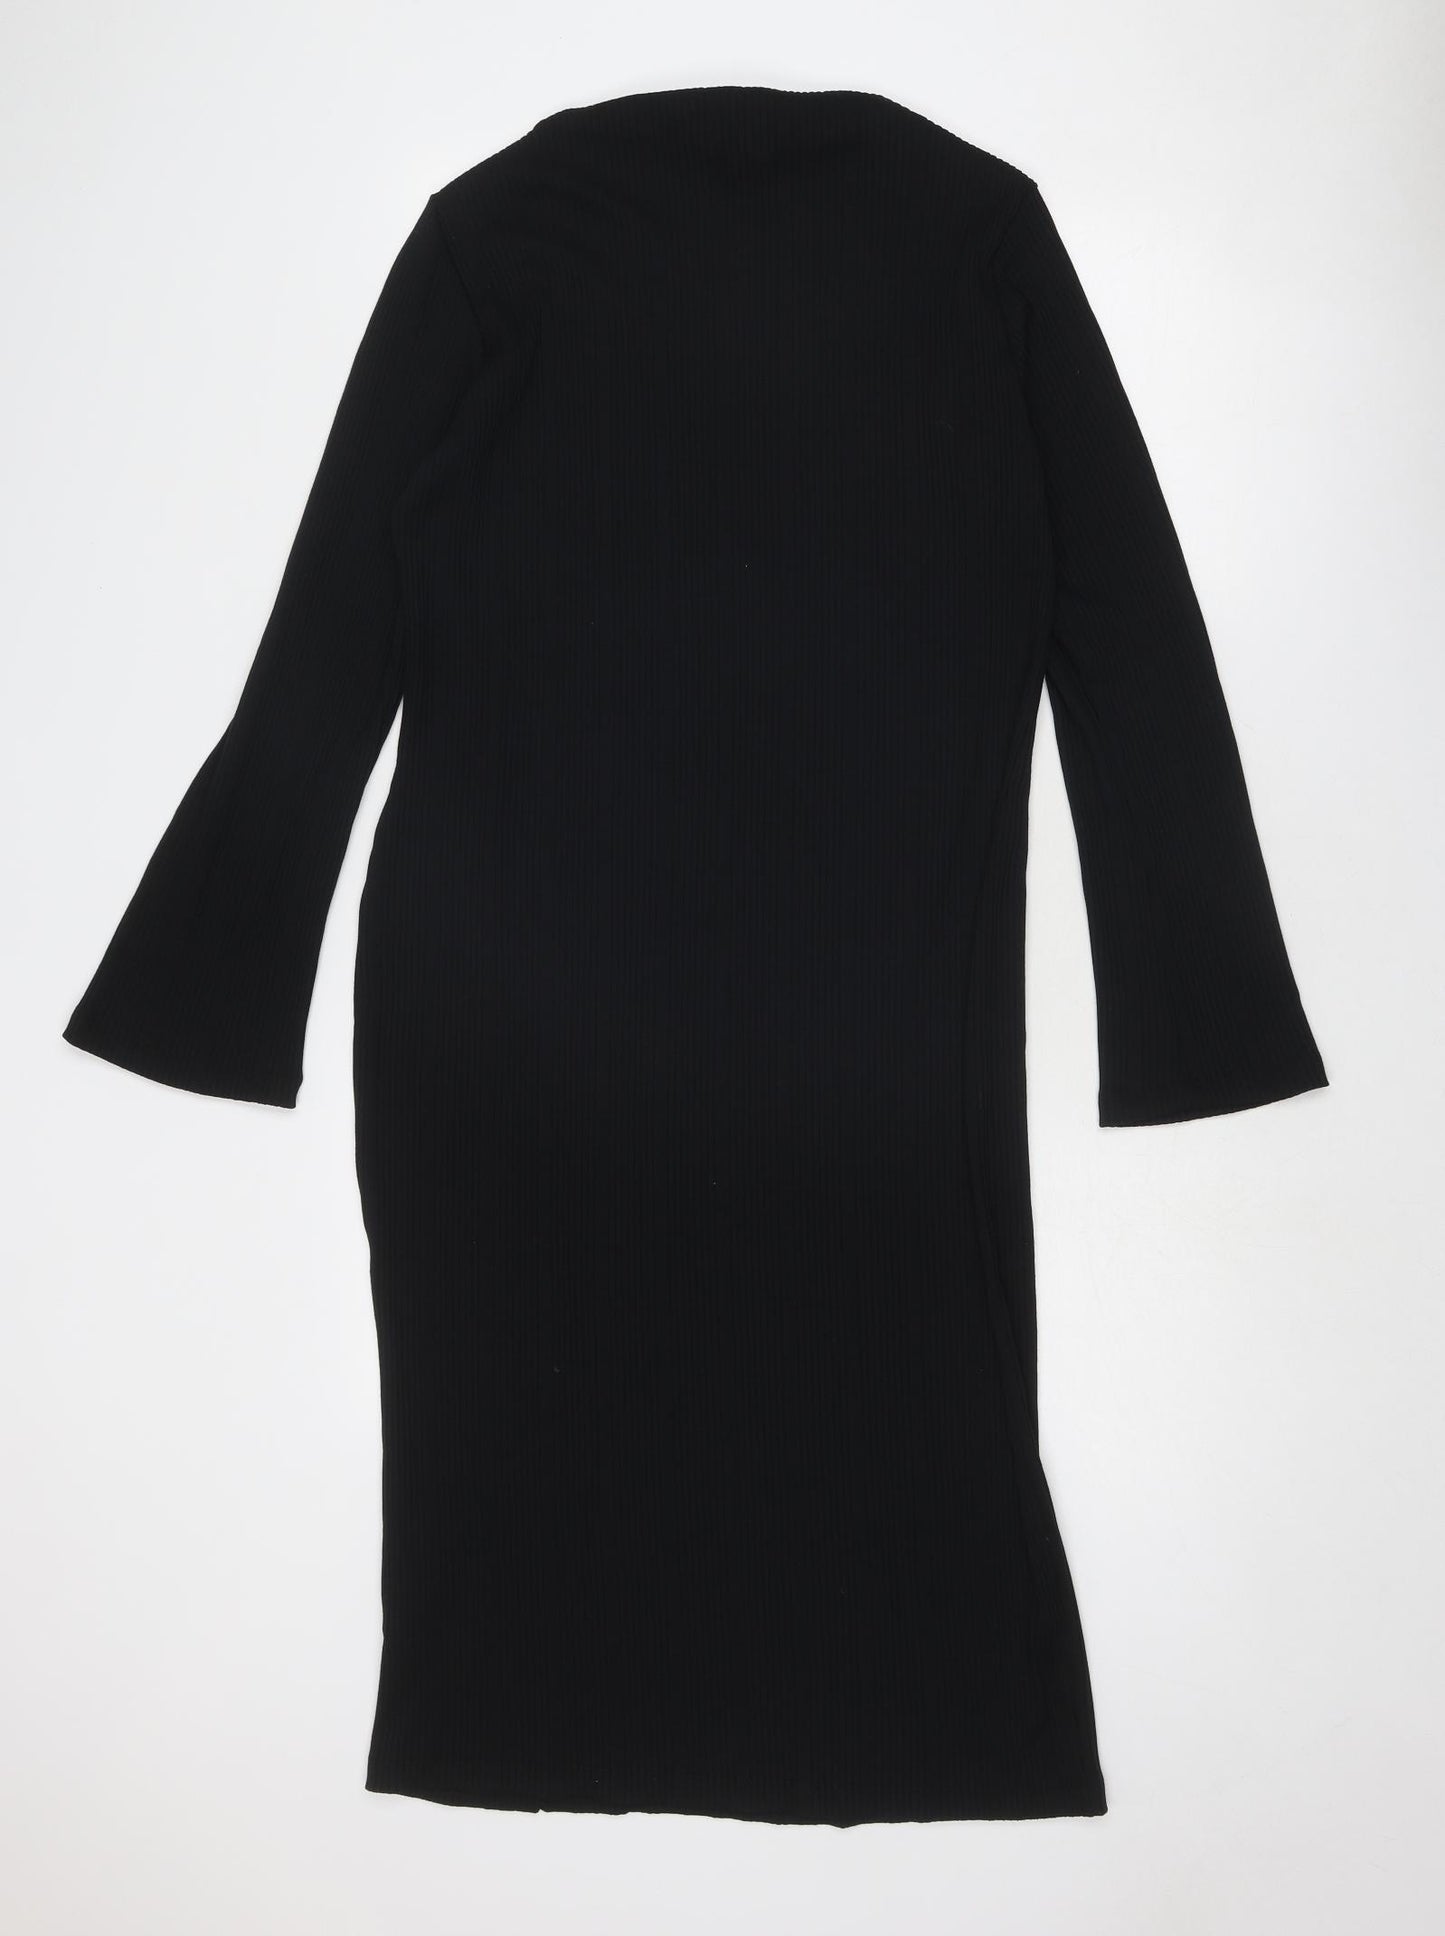 Marks and Spencer Womens Black Polyester Shift Size 14 Round Neck Pullover